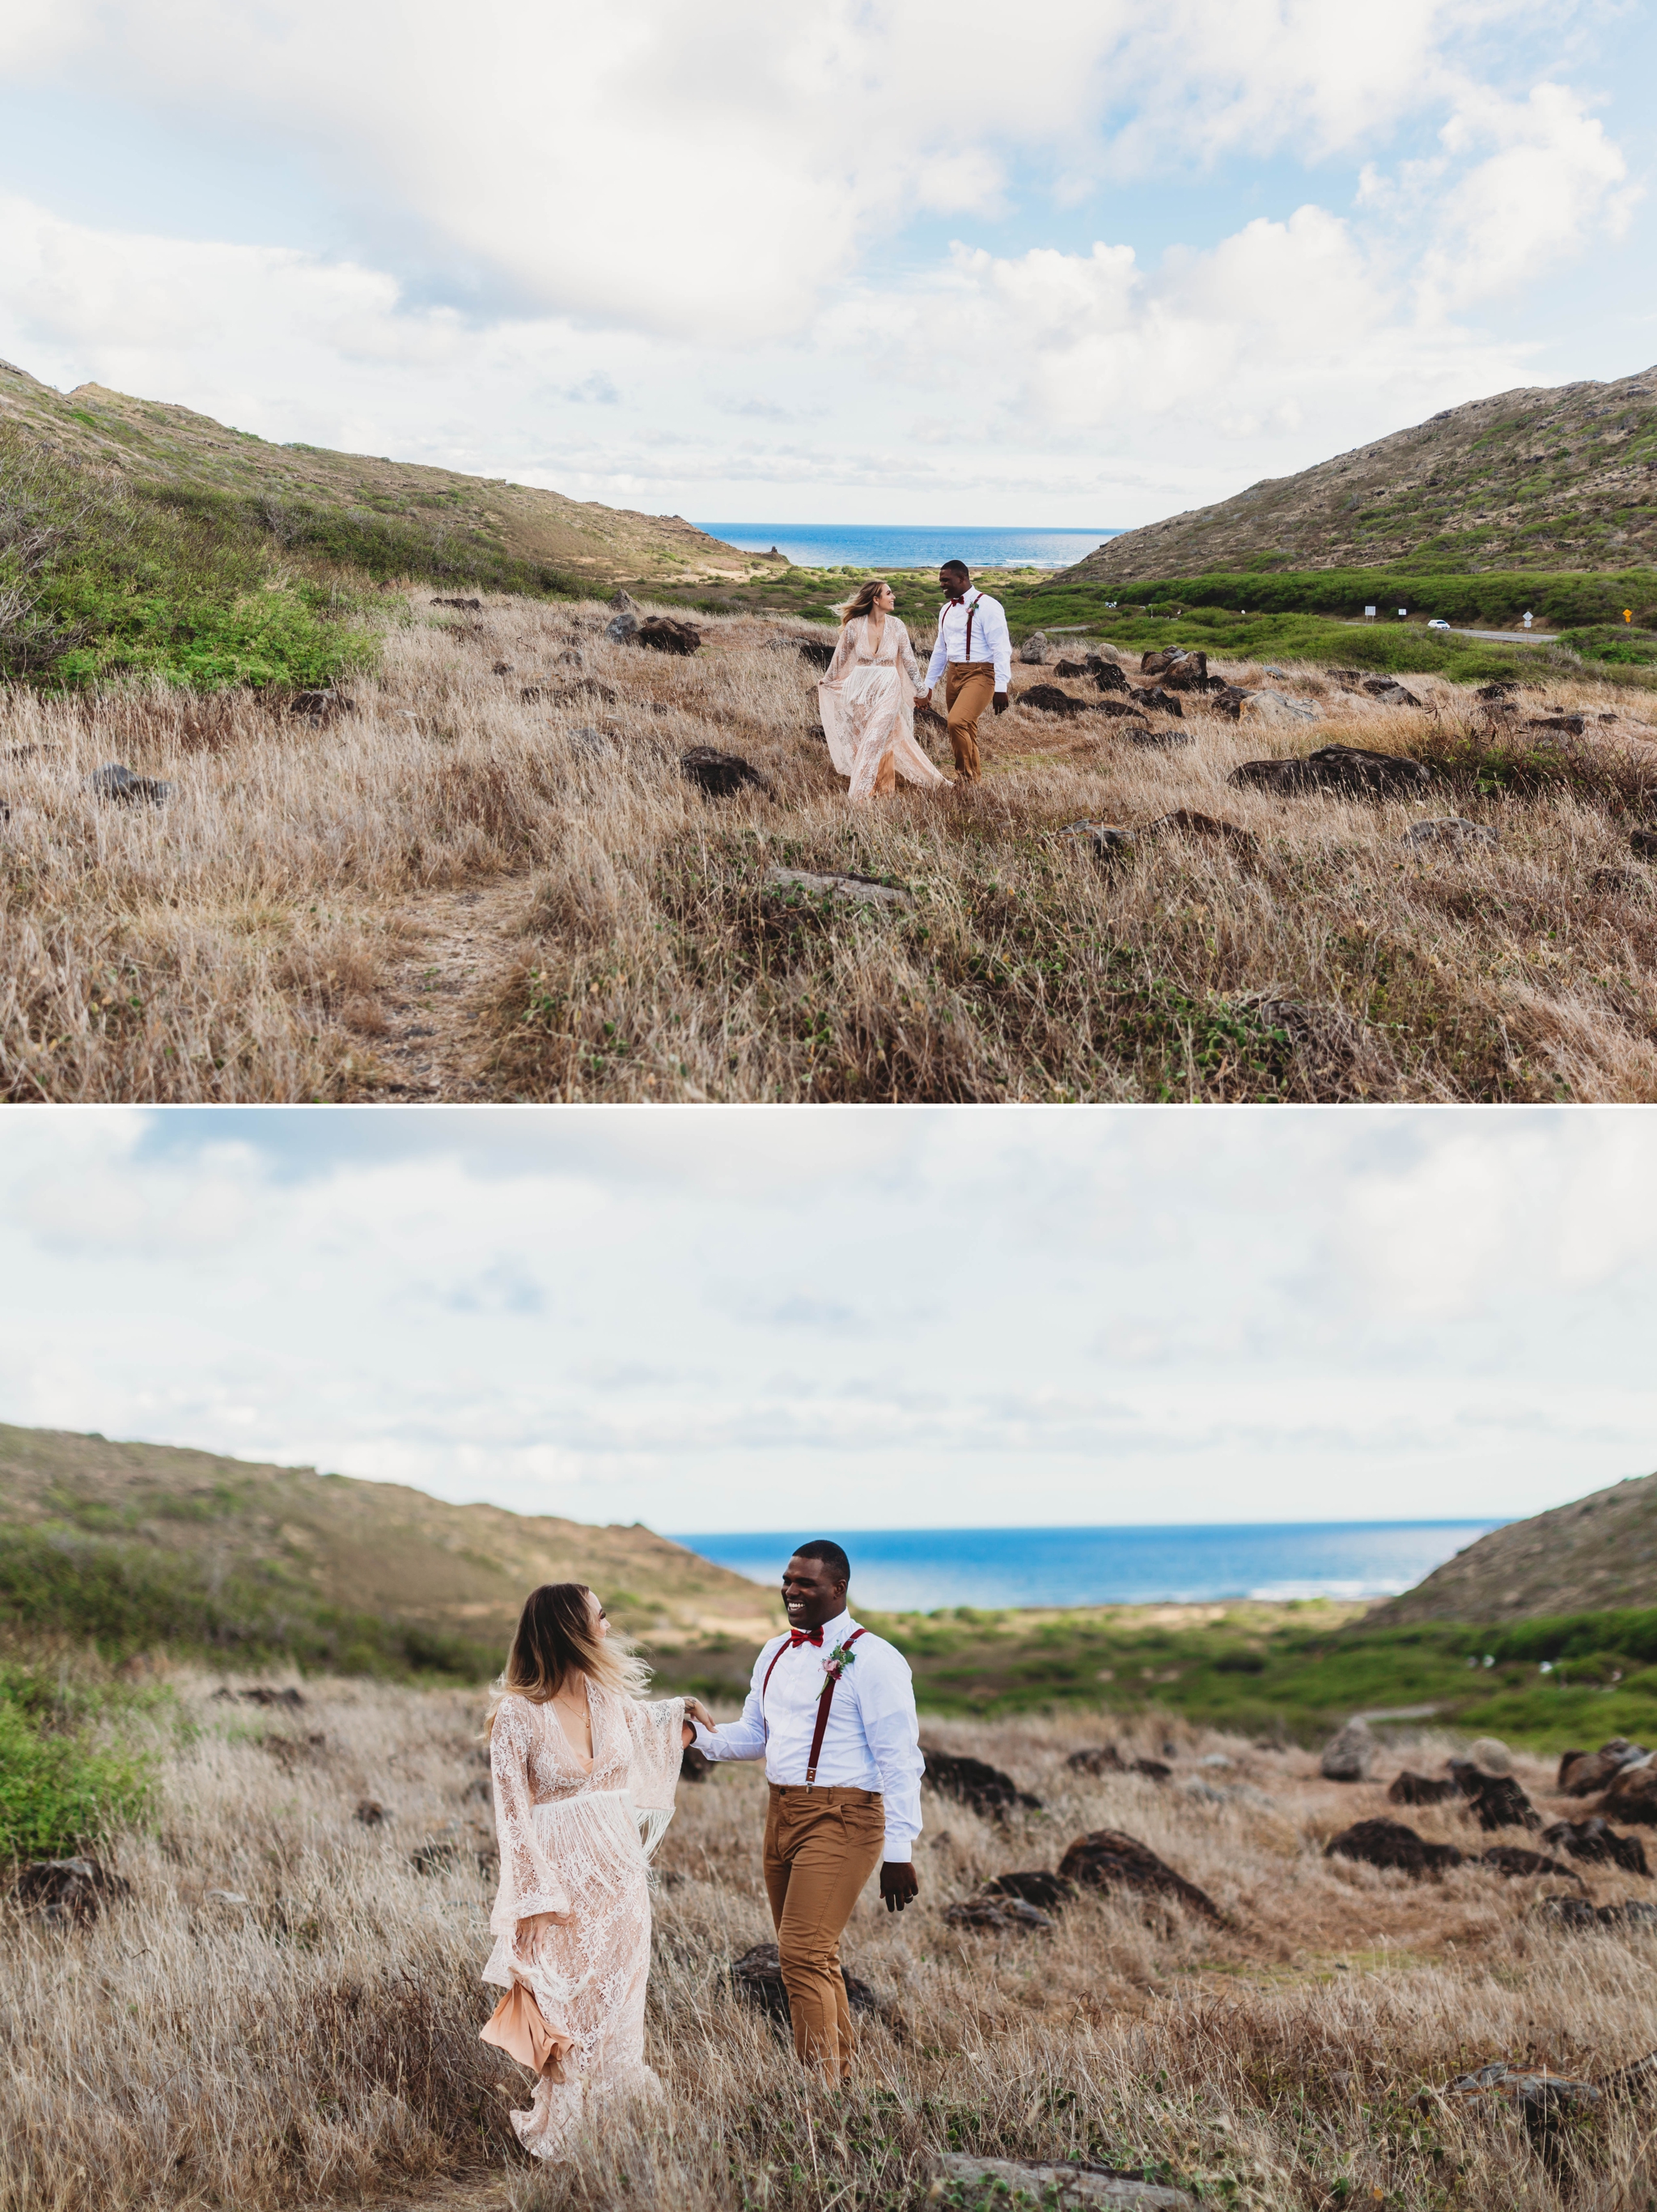  groom leading his bride down a grassy path - Elopement at Makapuu Lookout, Waimanalo, HI - Oahu Hawaii Engagement Photographer - Bride in a flowy fringe boho wedding dress - in grassy mountains with the ocean in the back - lanikai lookout - deutsche